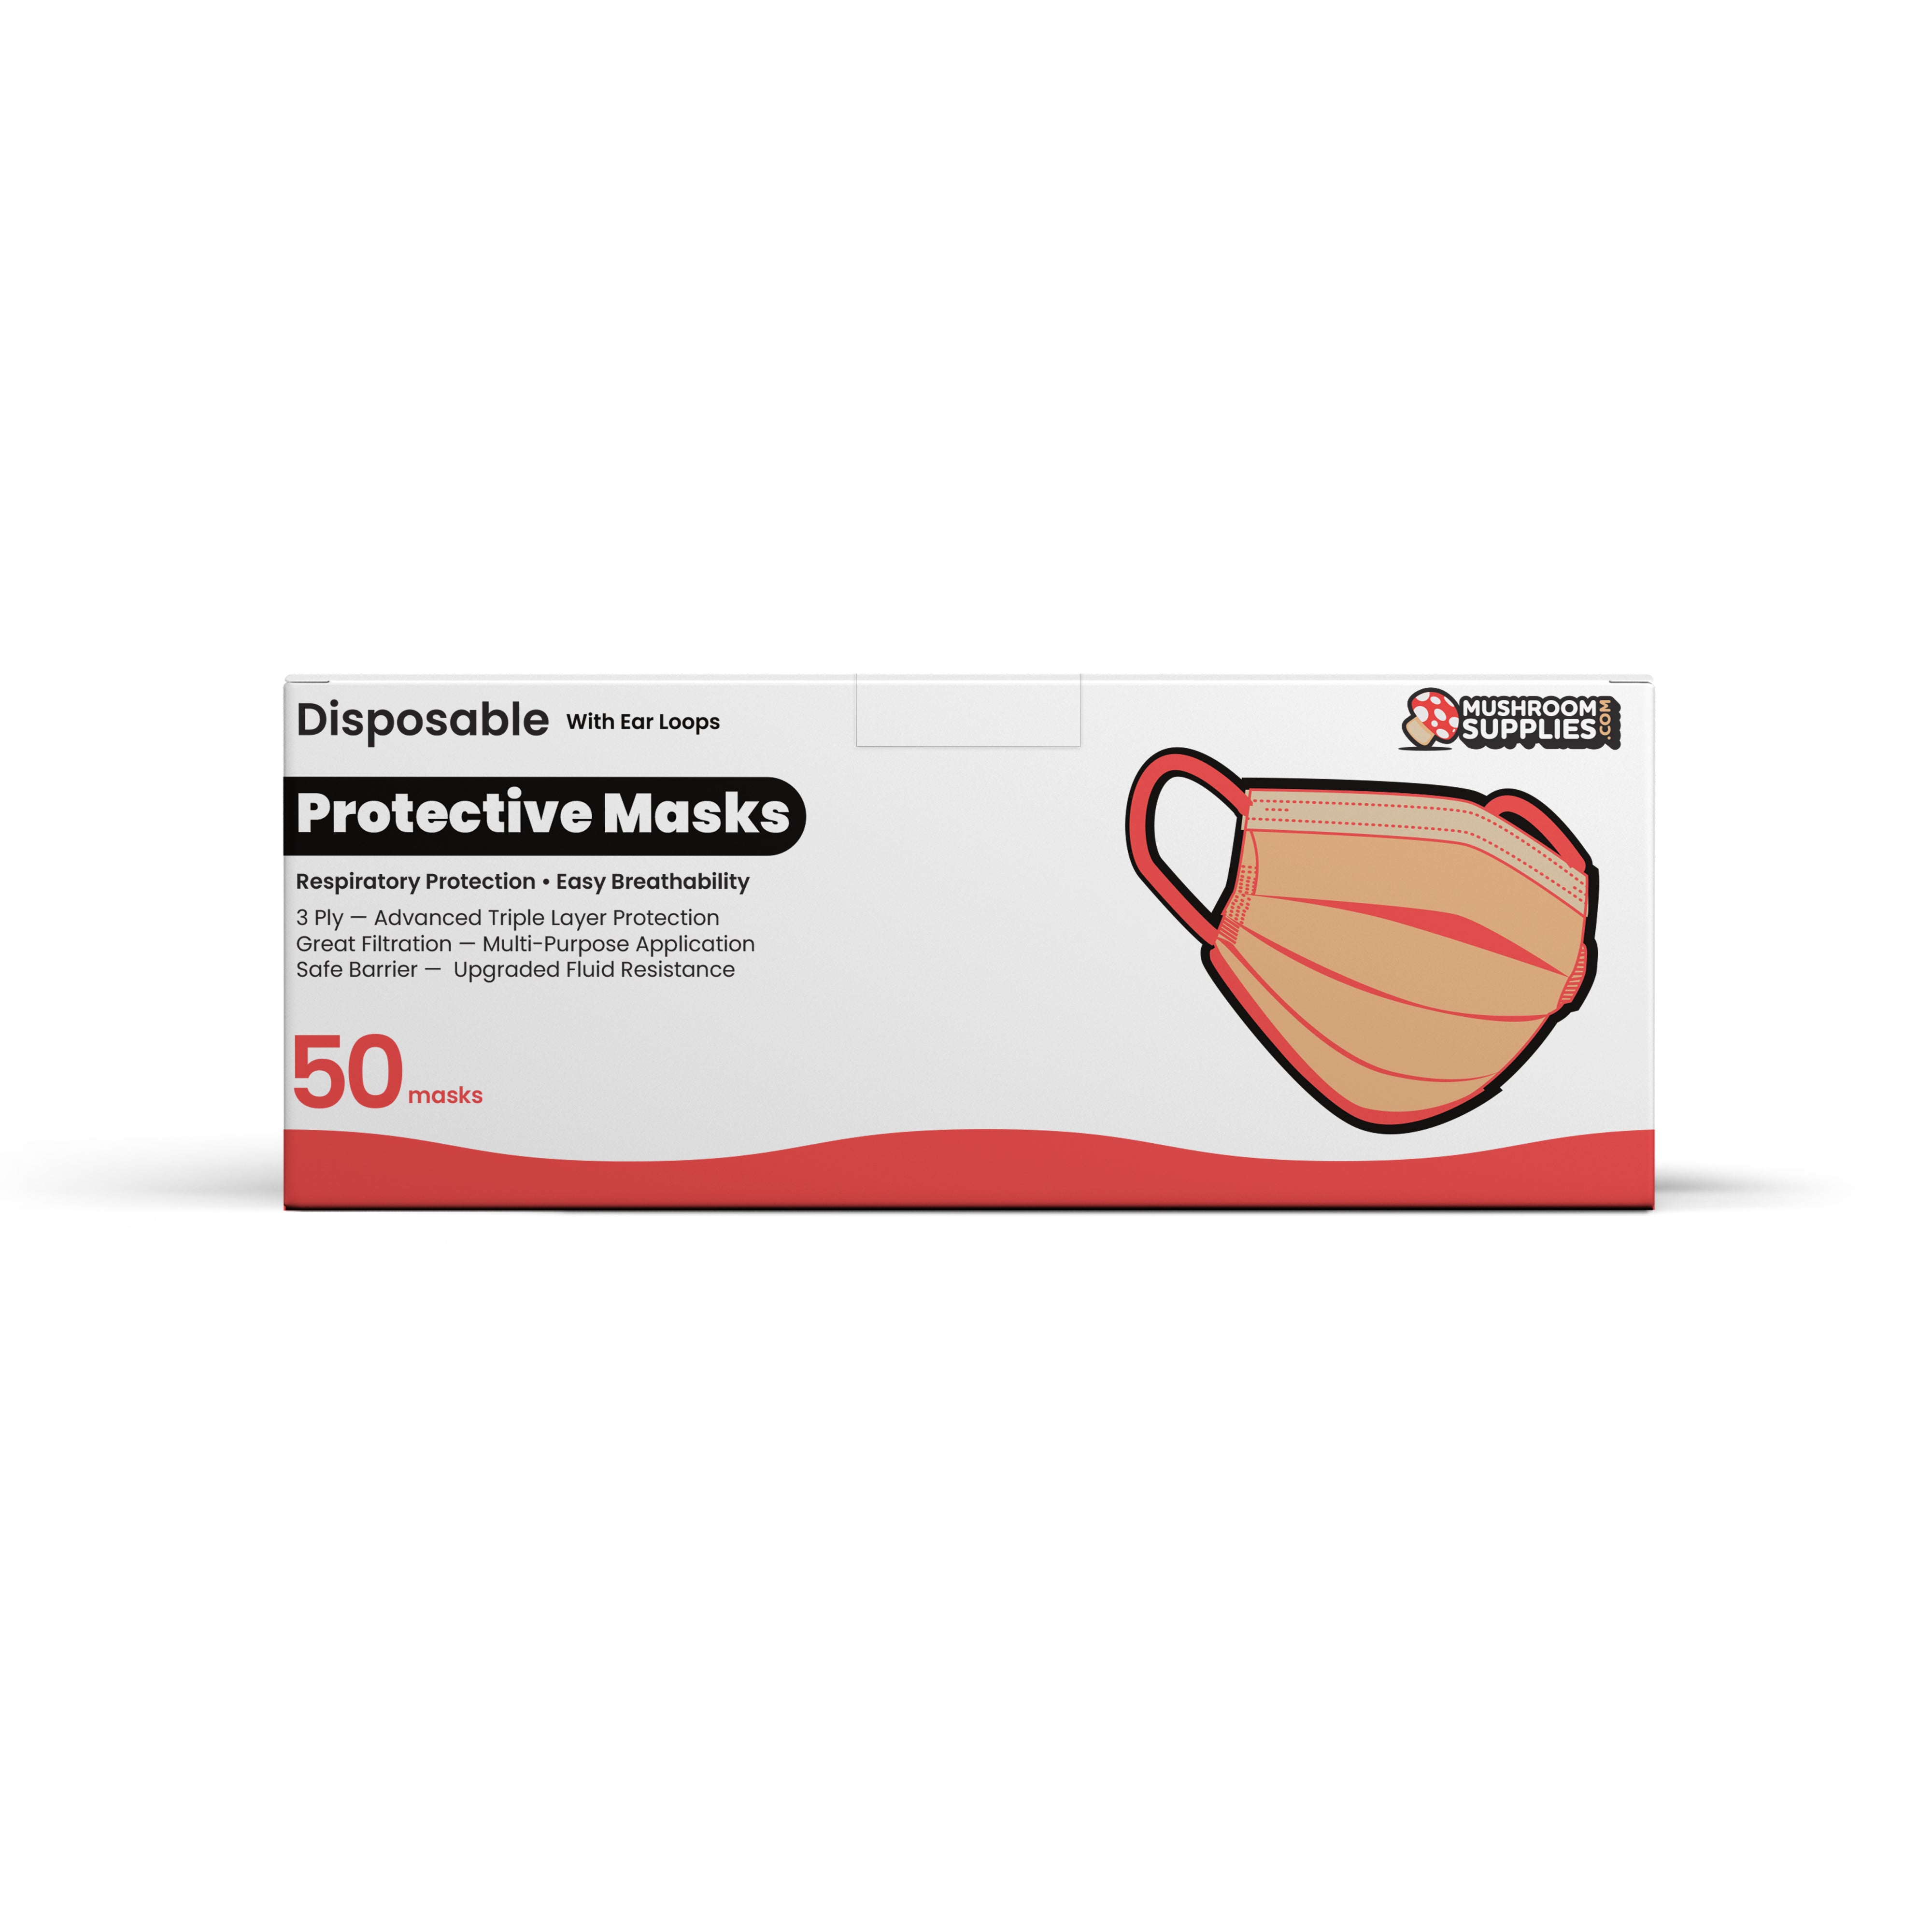 Disposable Face Masks - Individually Wrapped (50ct.) - Mushroom Supplies Co.